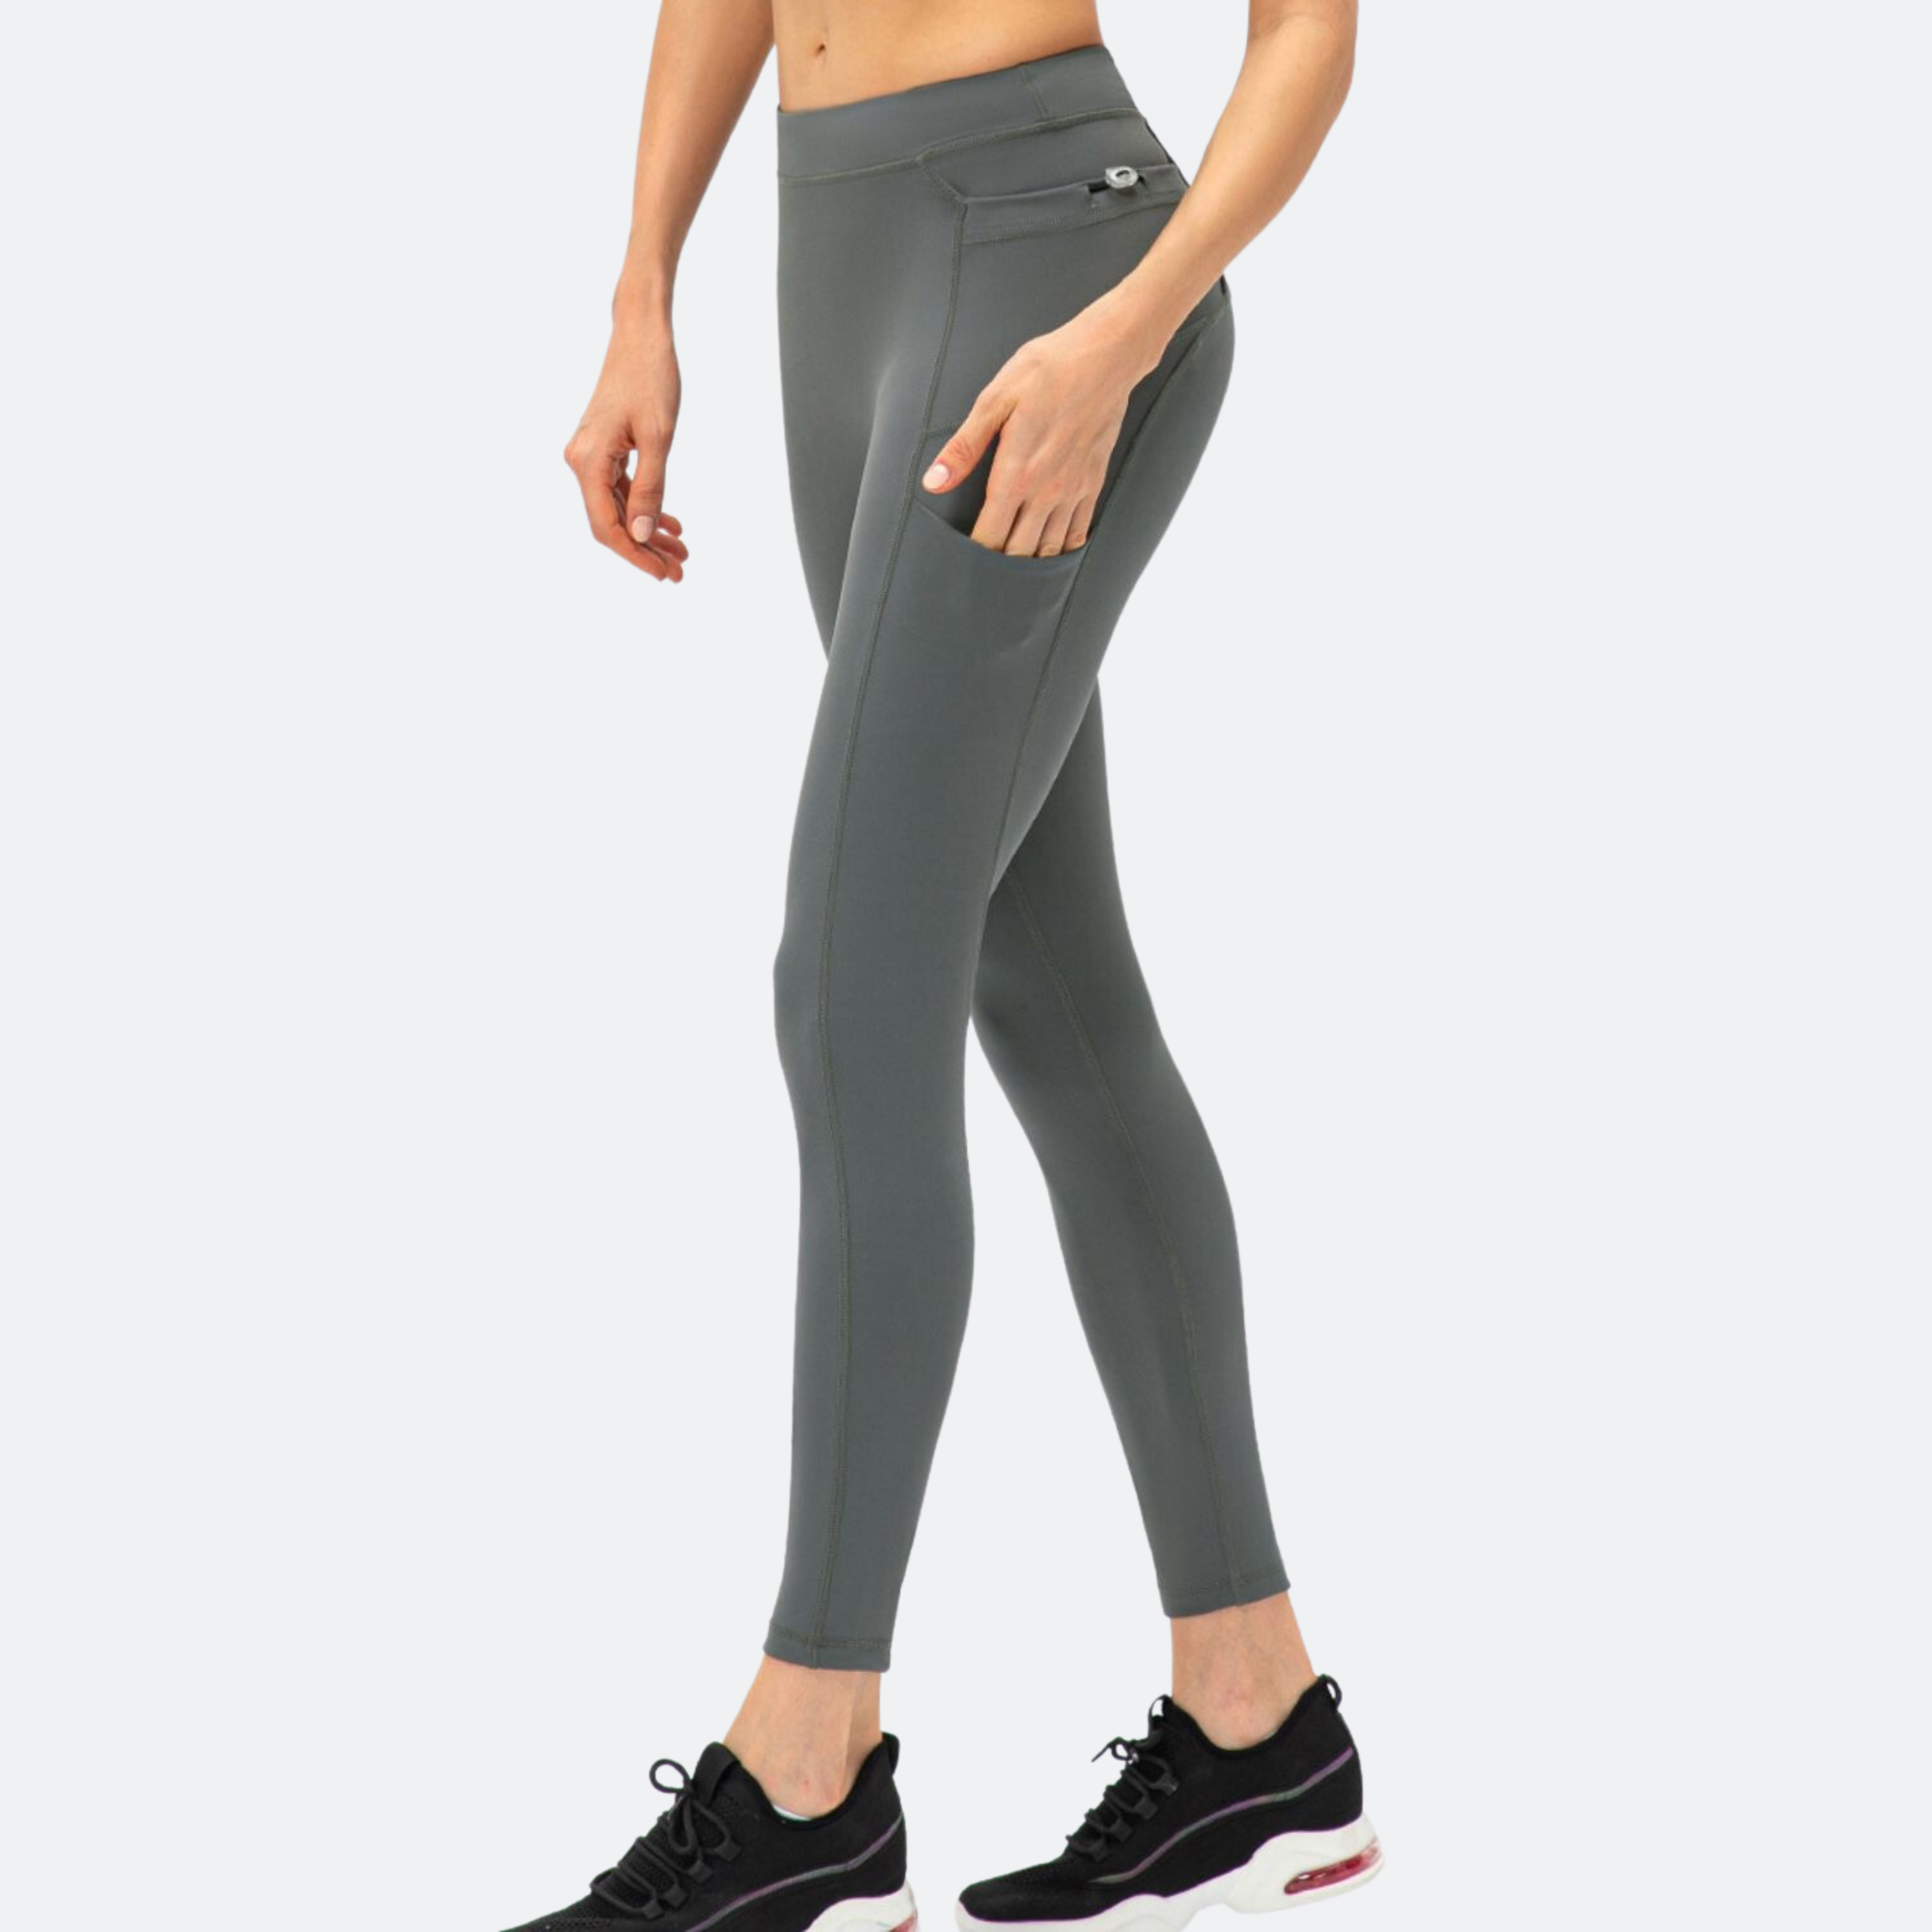 The Nuclear Power Leggings with Pockets